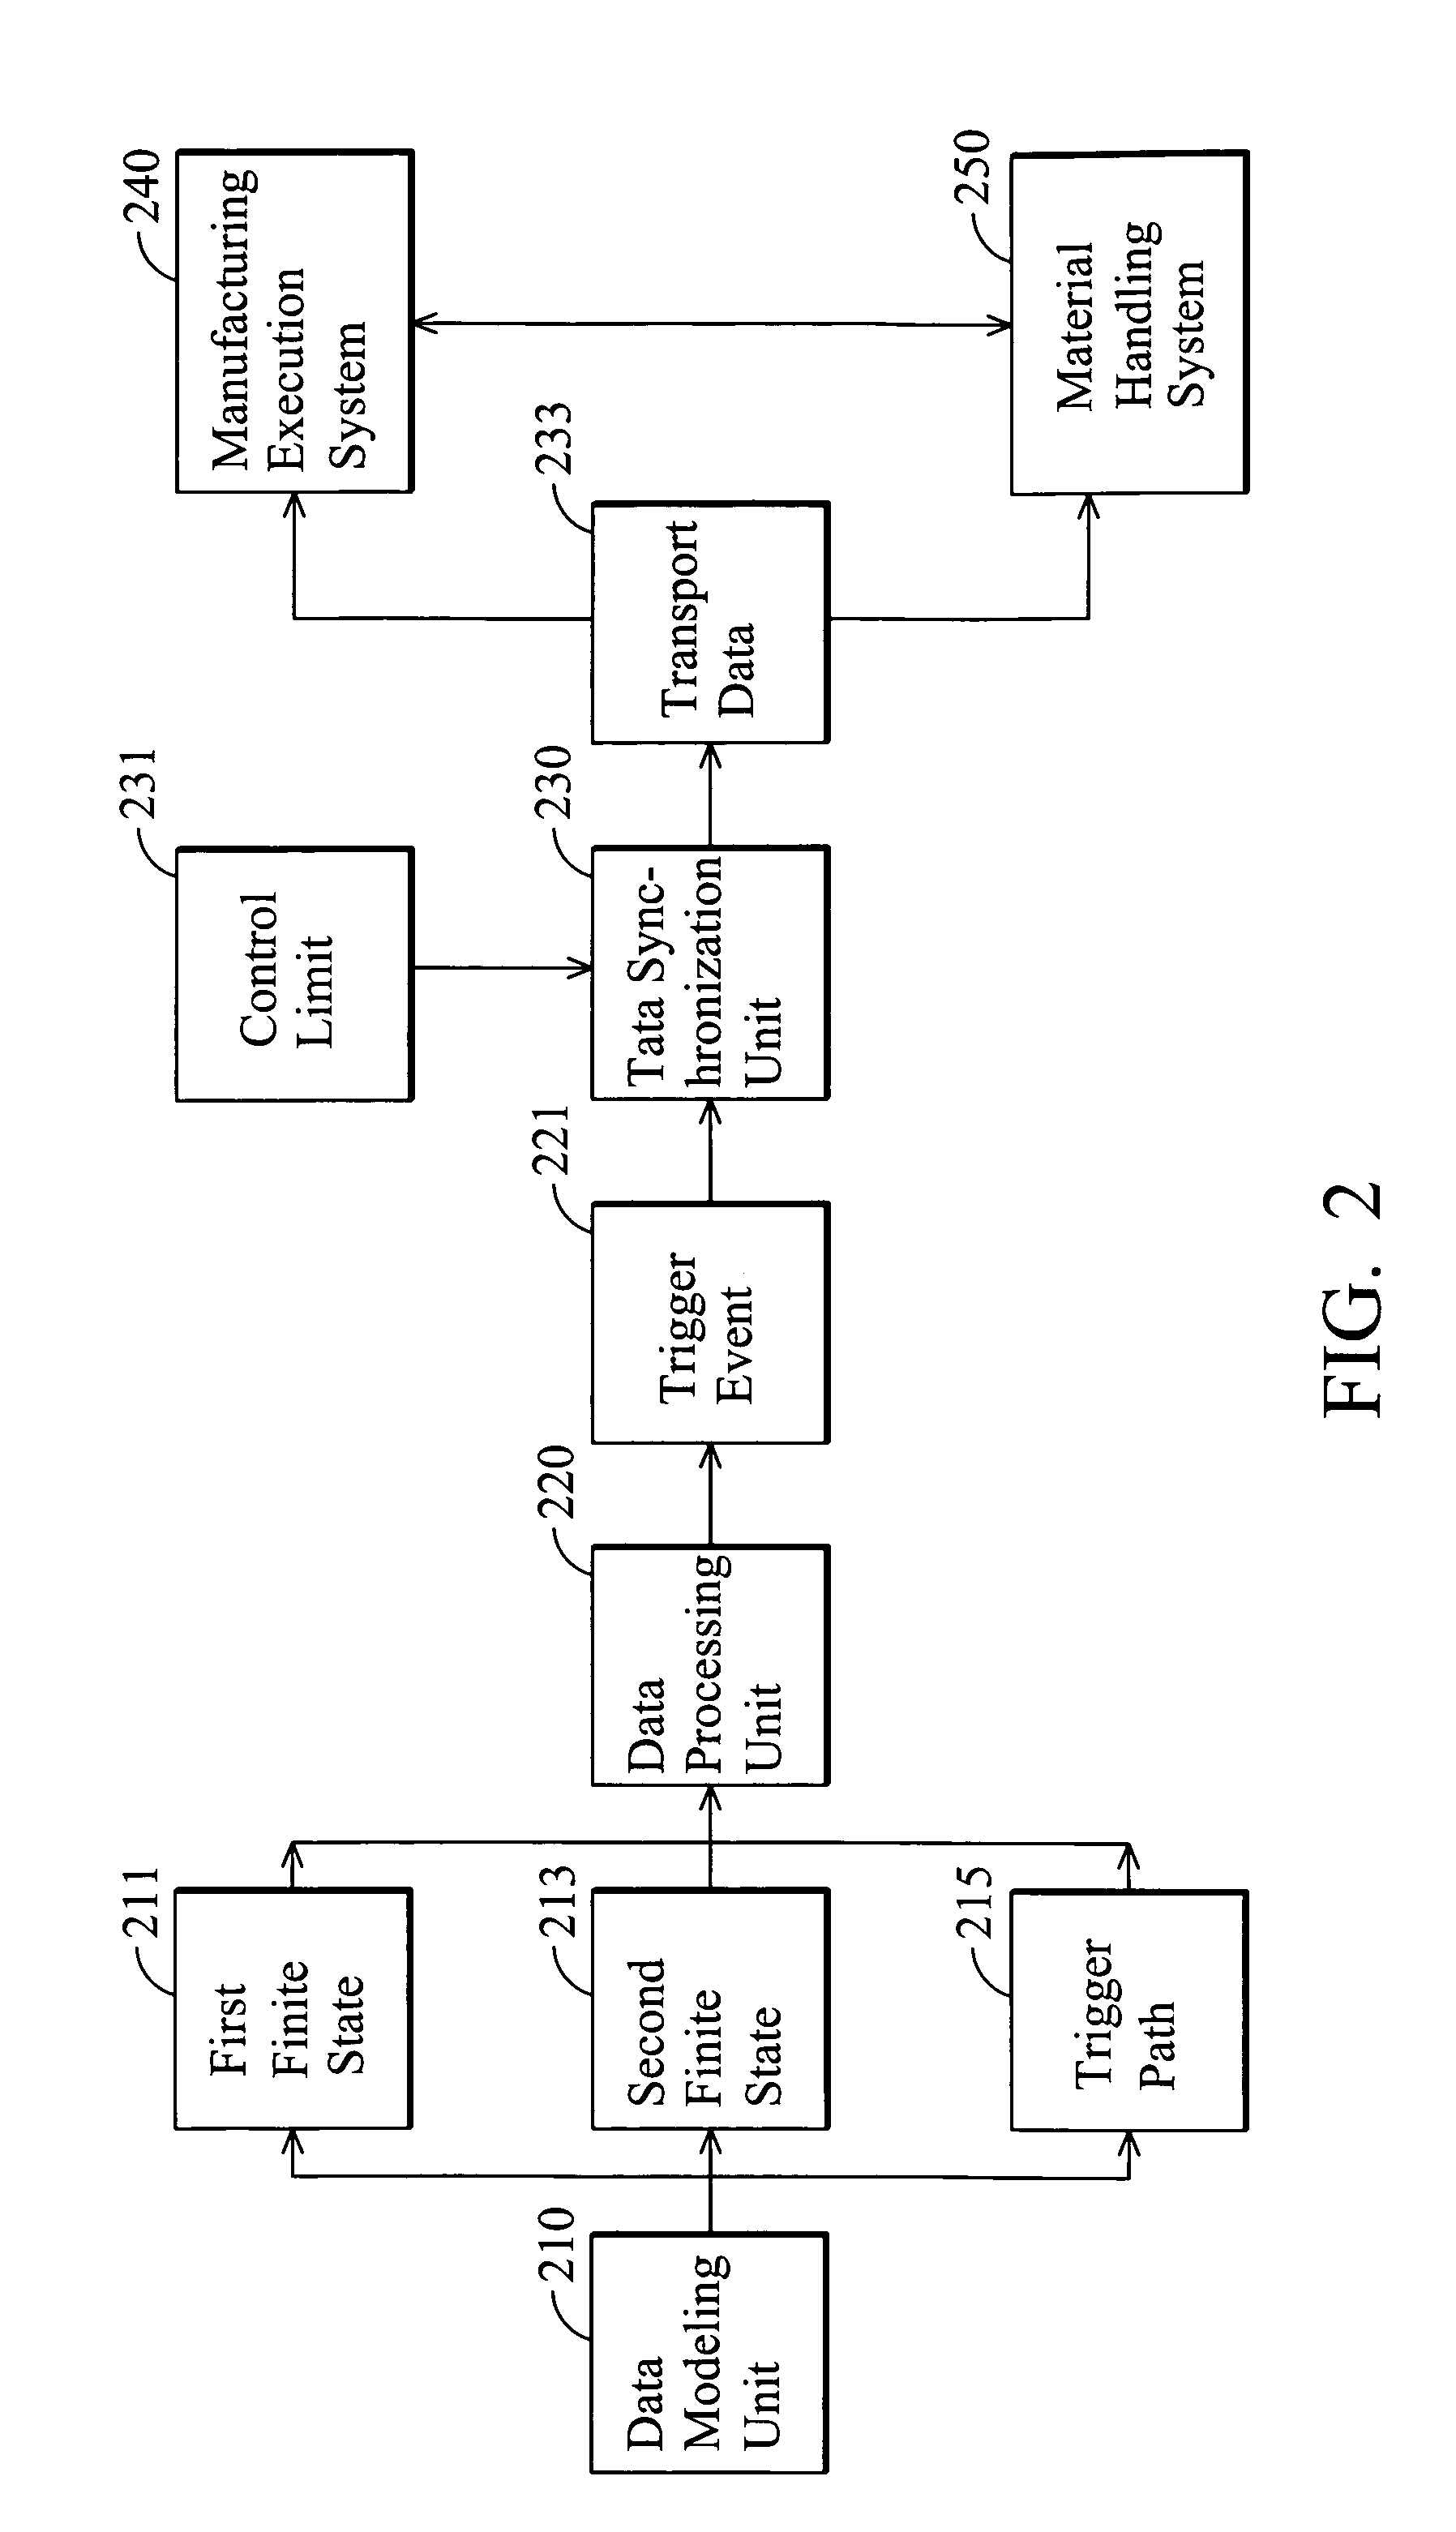 Material handling system enabling enhanced data consistency and method thereof